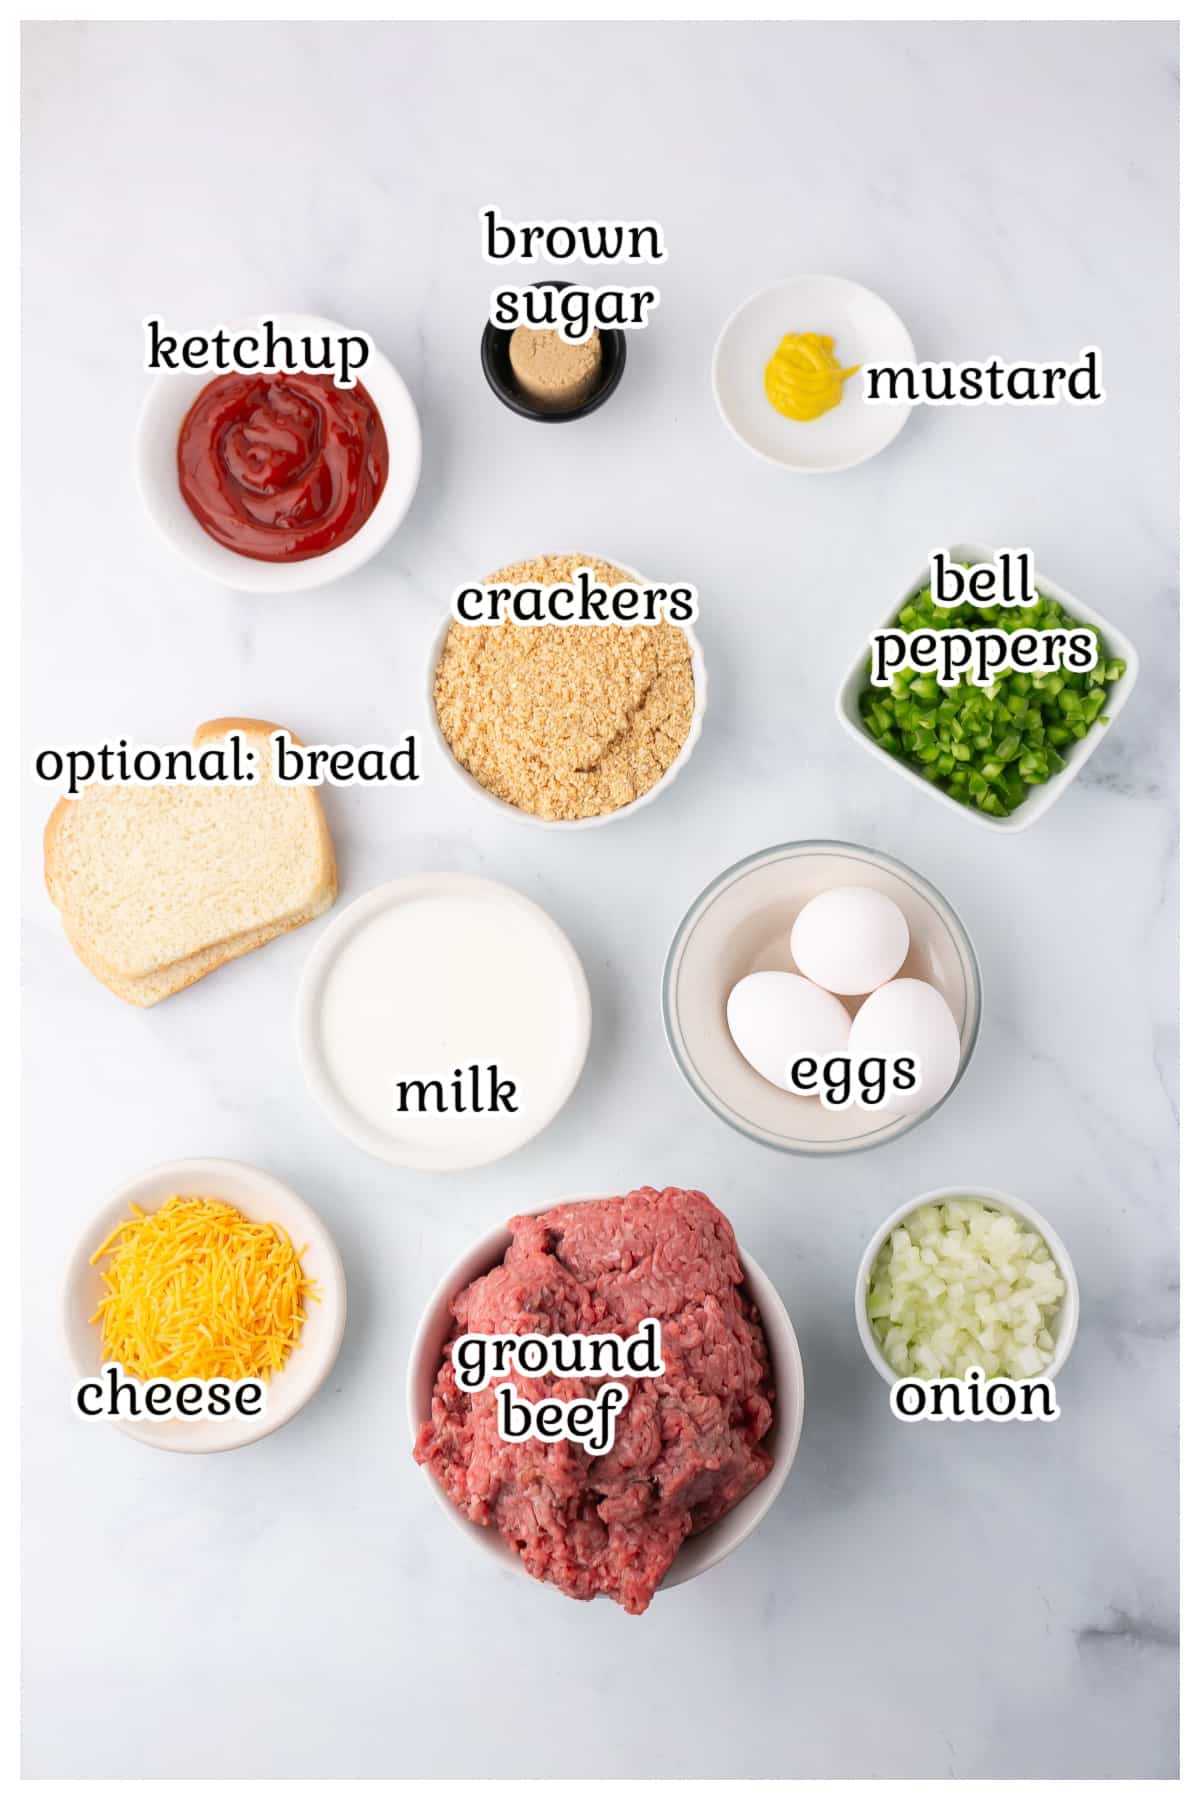 Ingredients of the meatloaf with text overlay.